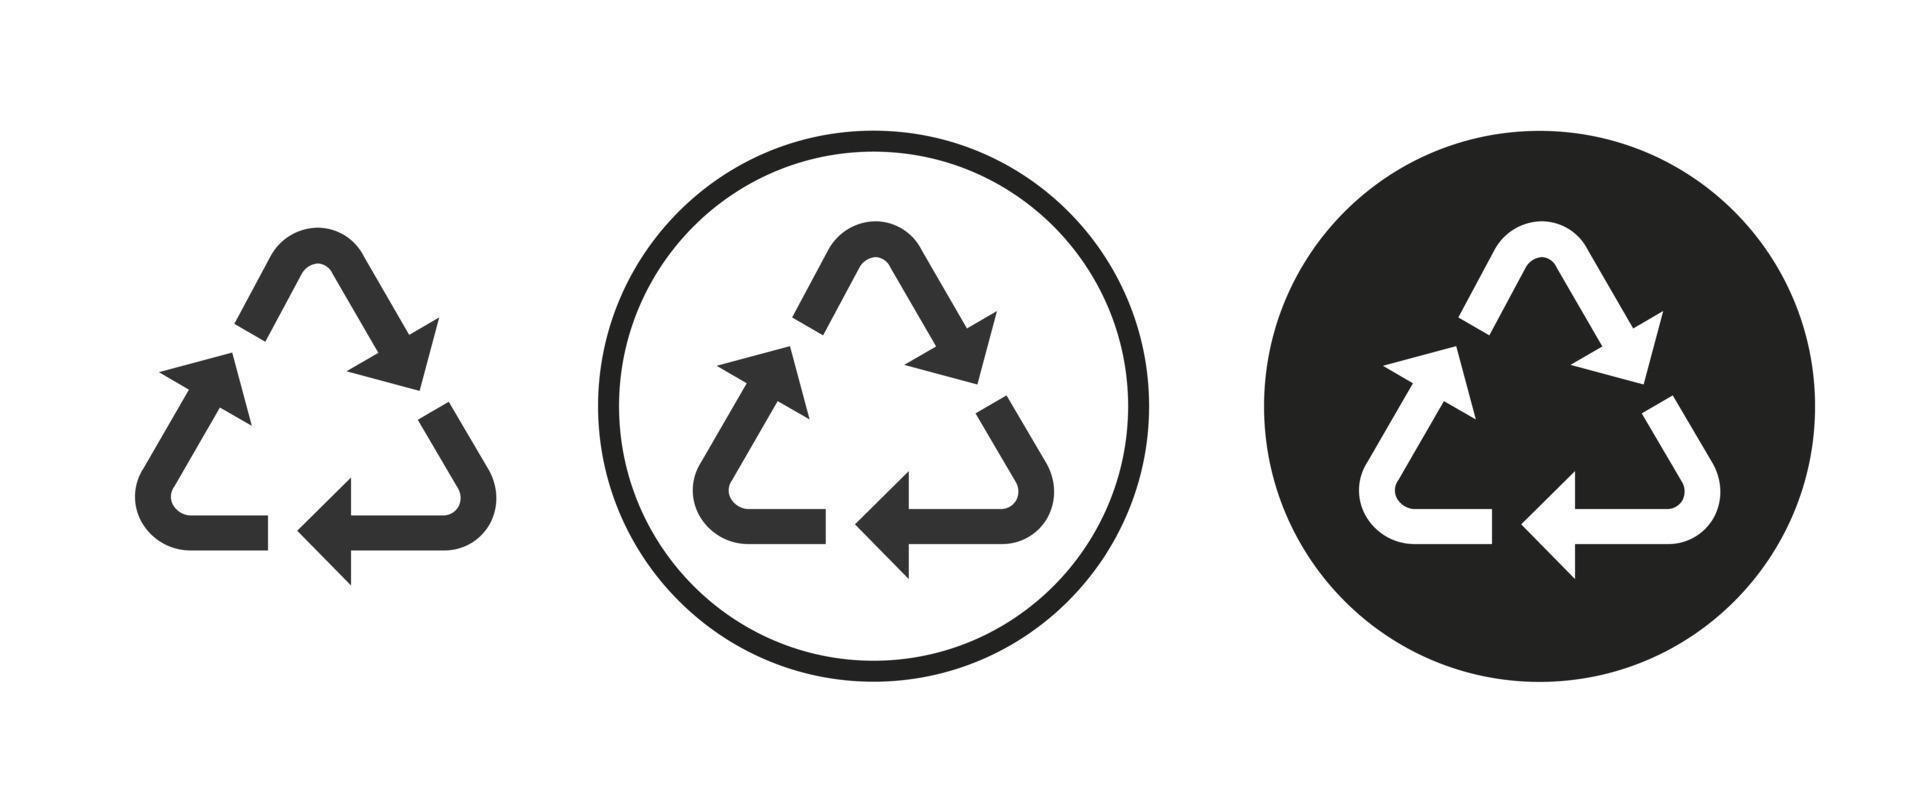 recycle icon . web icon set . icons collection. Simple vector illustration.